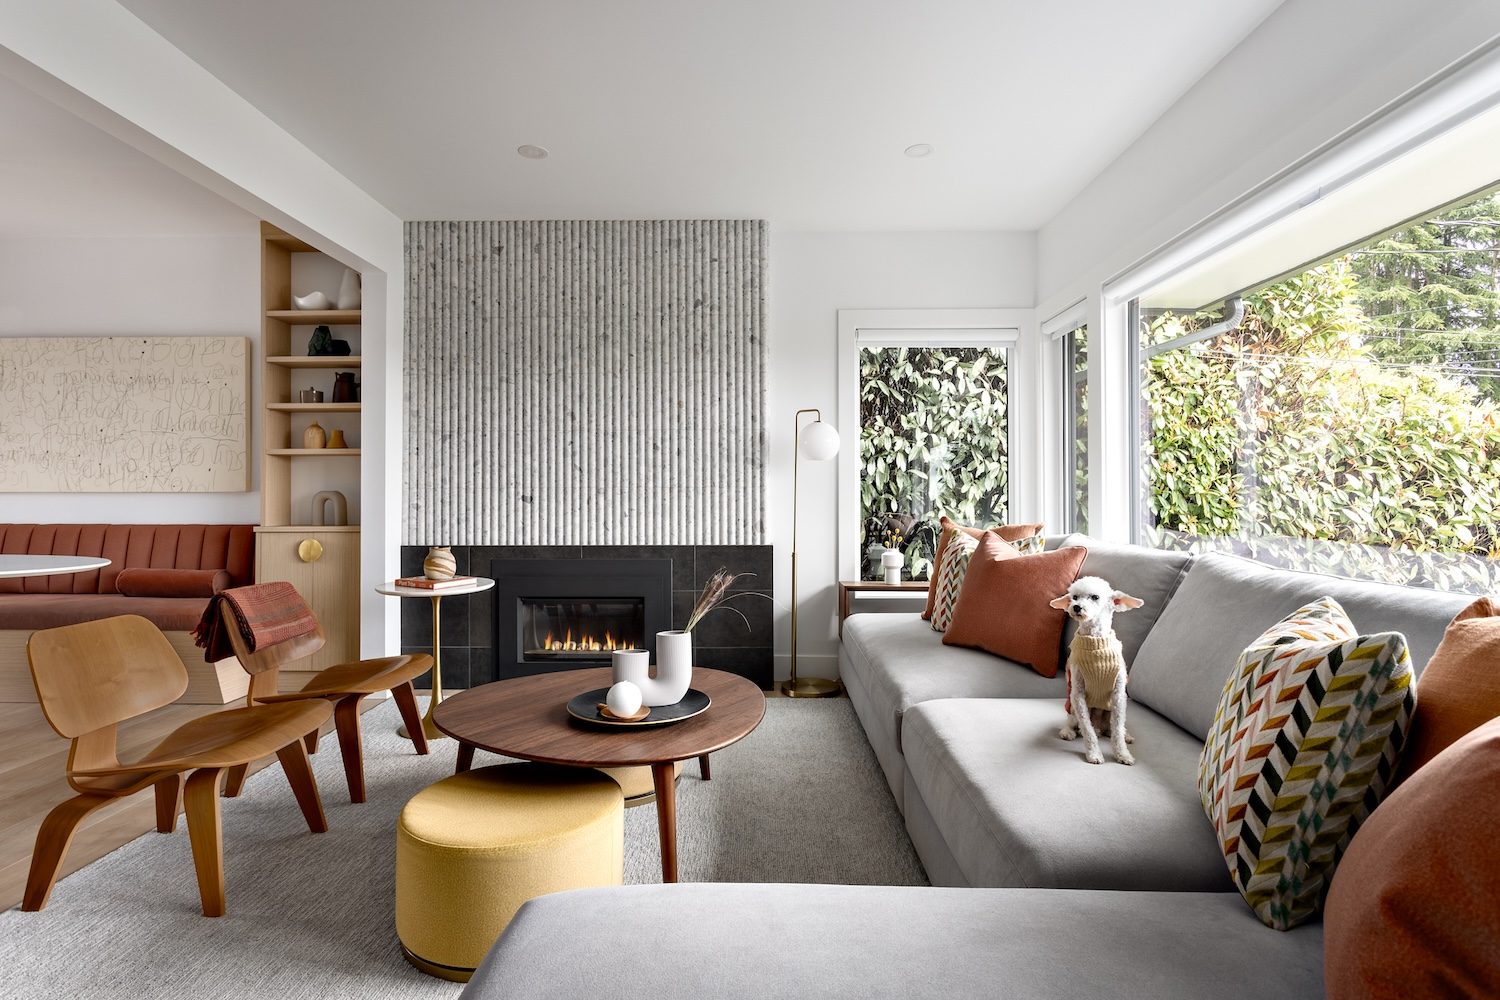 simply-home-decorating-west-vancouver-bc-ca-a-mid-century-modern-home-fluted-tile-fireplace-and-vintage-bent-wood-eames-chairs-modern-interior-design